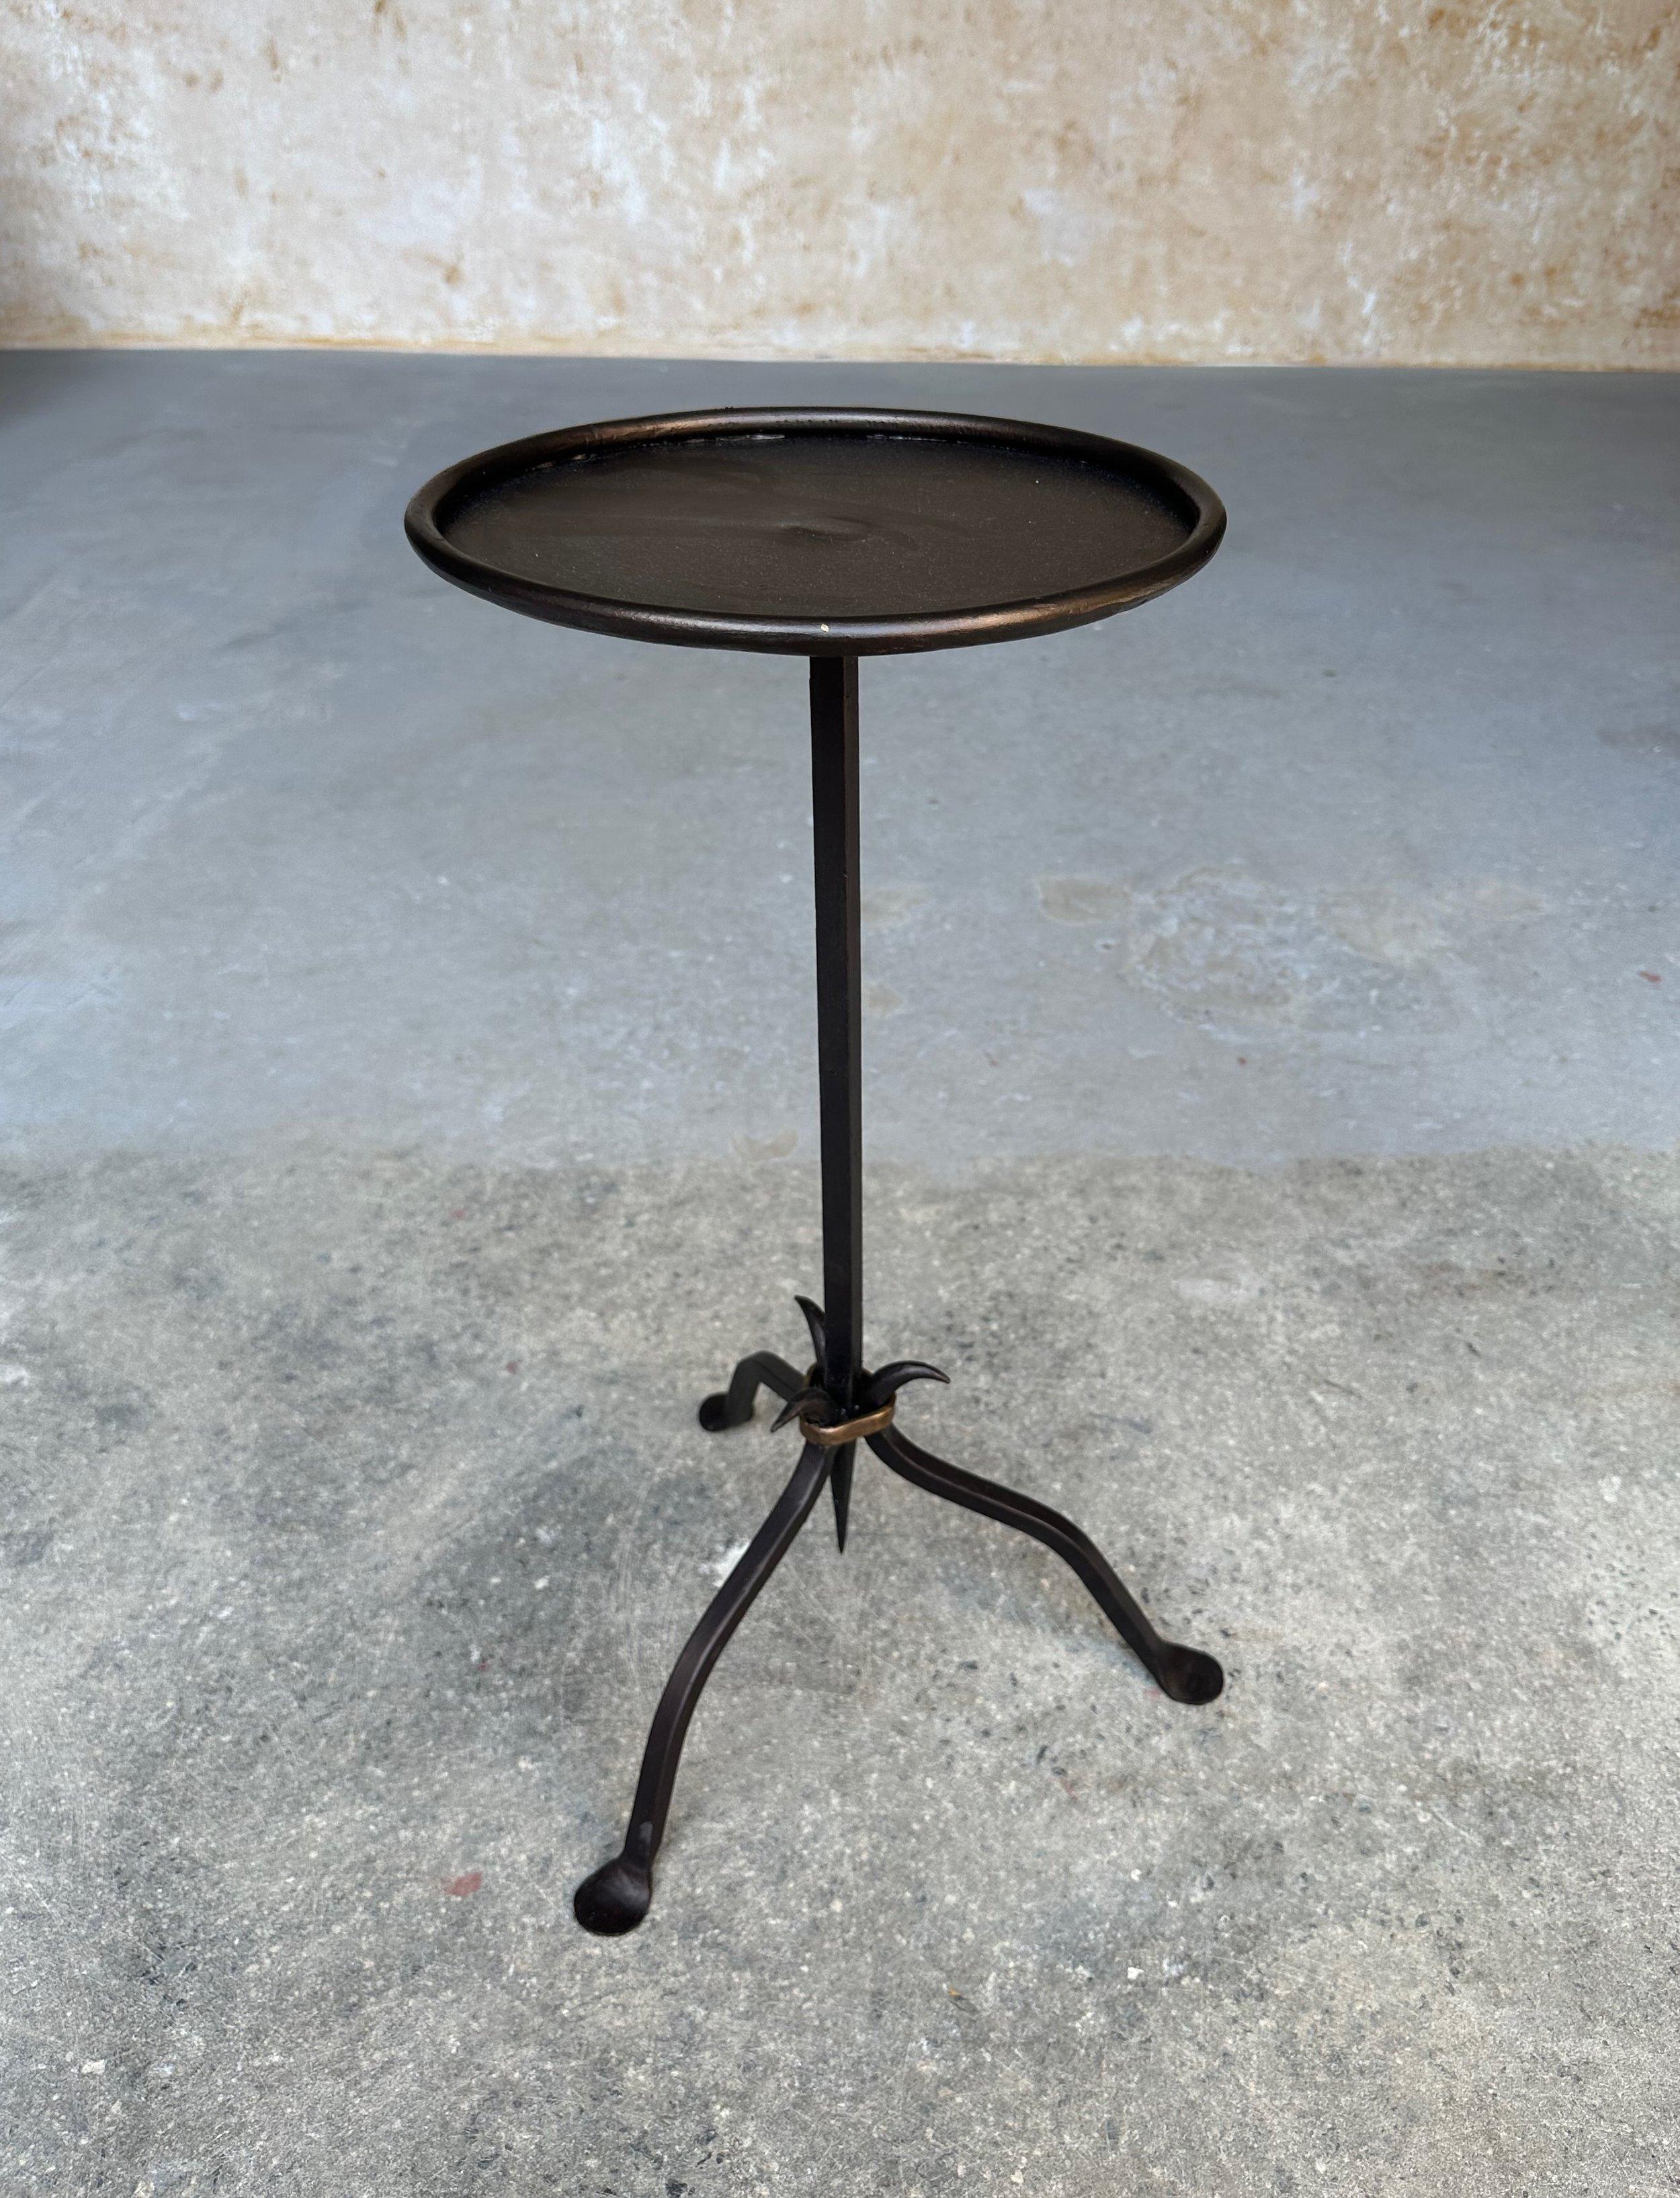 This small iron and metal end table from Spain was recently crafted by skilled artisans using conventional iron-working techniques. Based on a vintage 1950s design, it features a sturdy tripod base with a central ring securing the stem that tapers